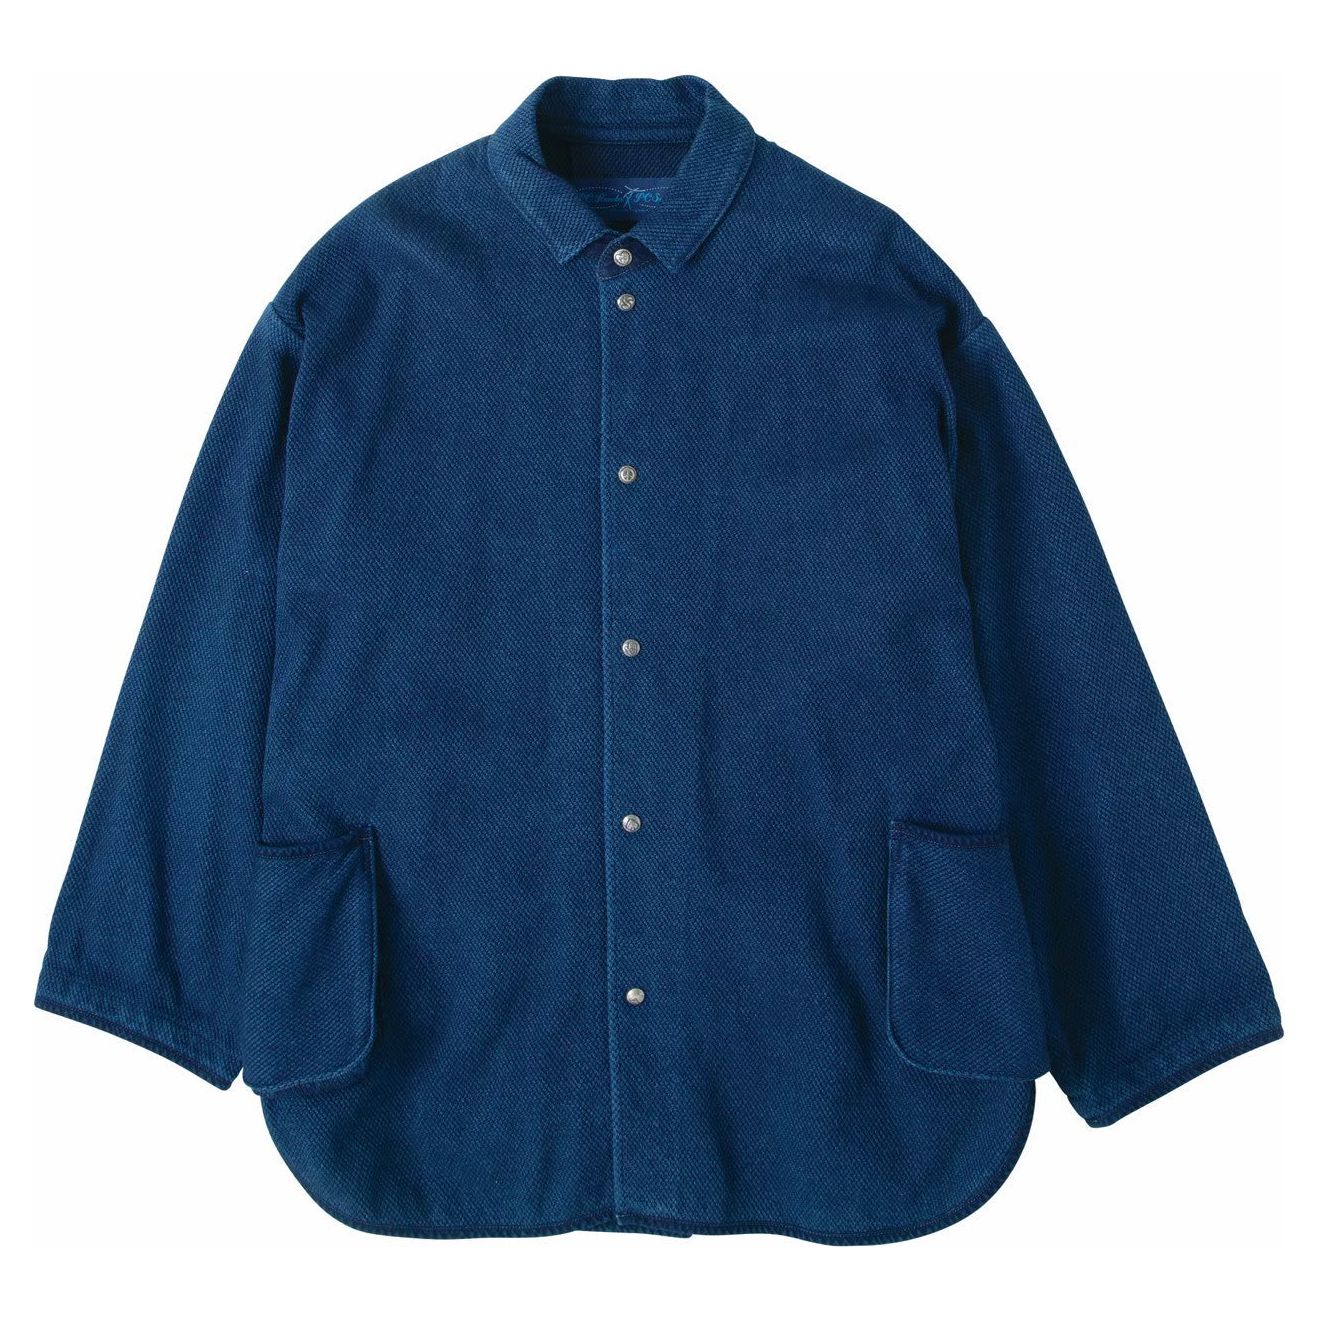 PC KENDO SHIRT JACKET W/SILVER BUTTONS購入時の明細はございますか